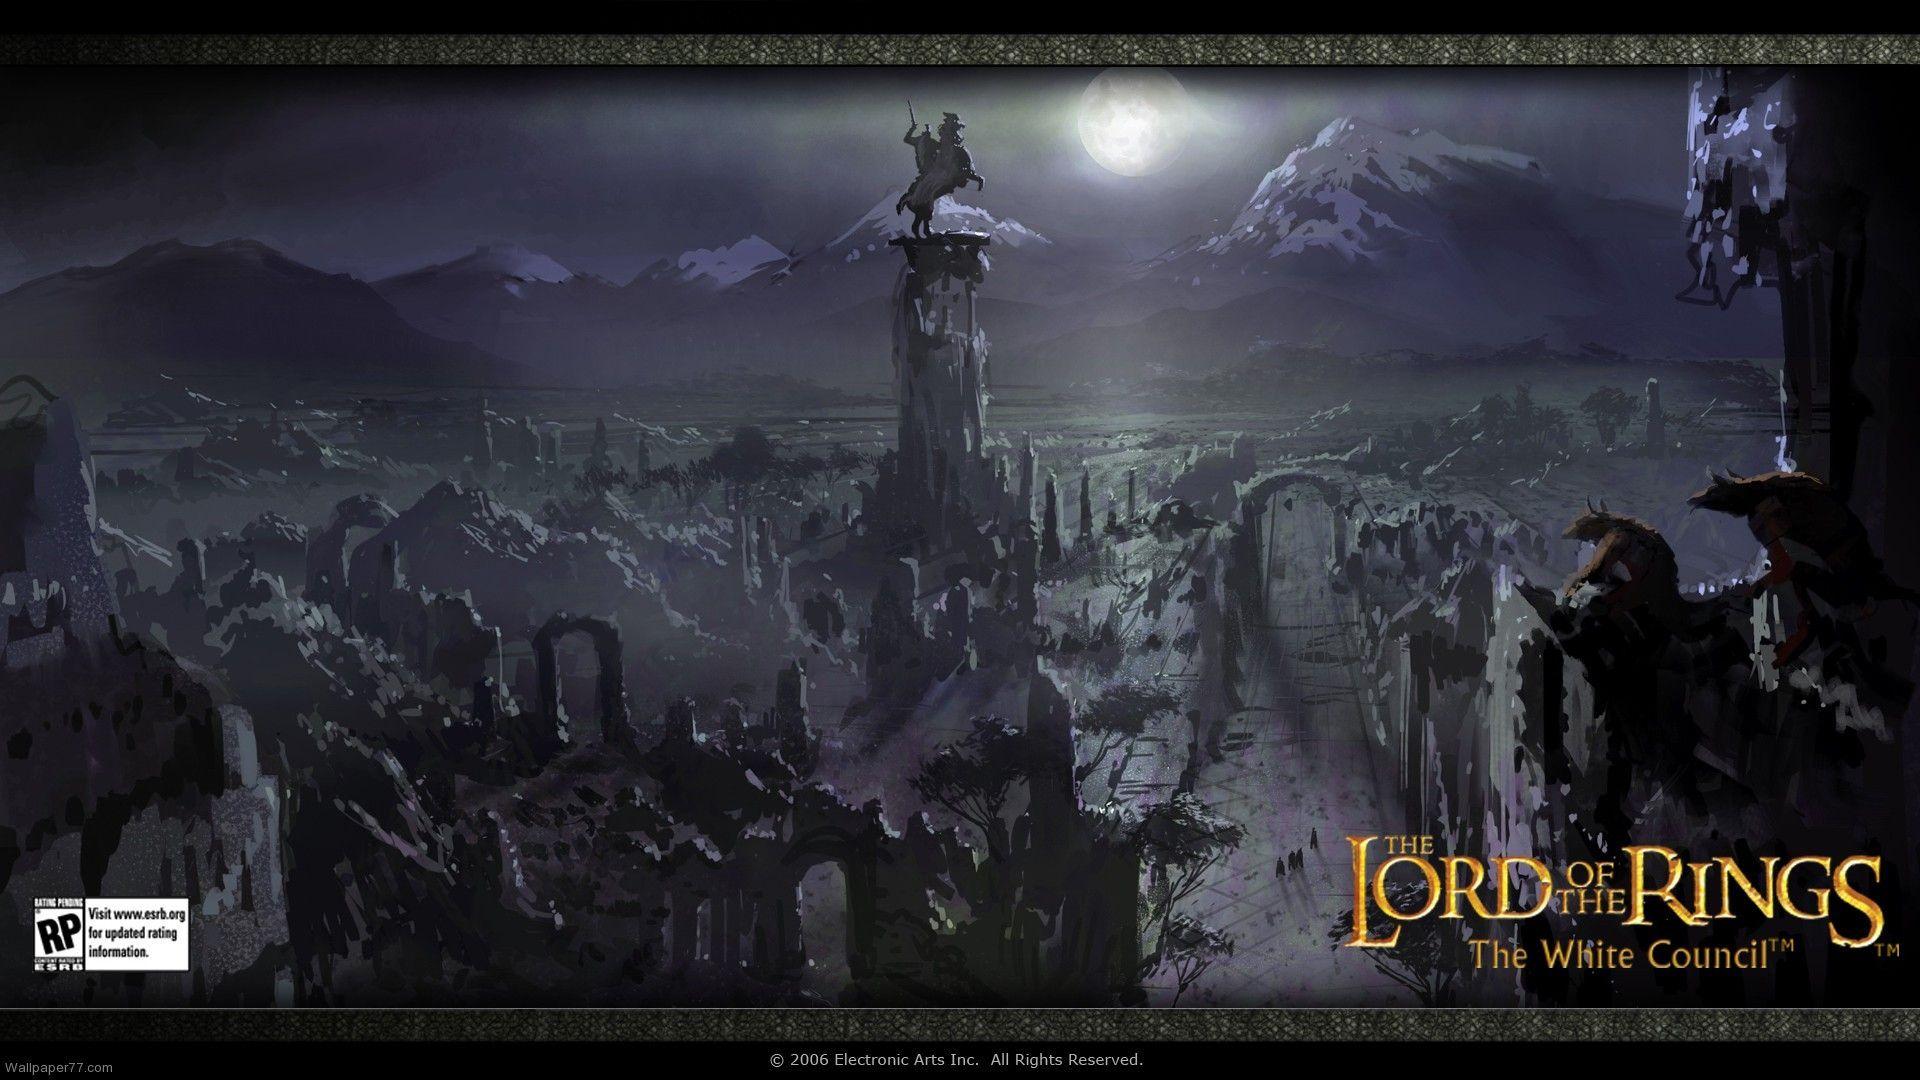 Lord Of The Rings Wallpaper 4 Lord Of The Rings Wallpaperlord Of